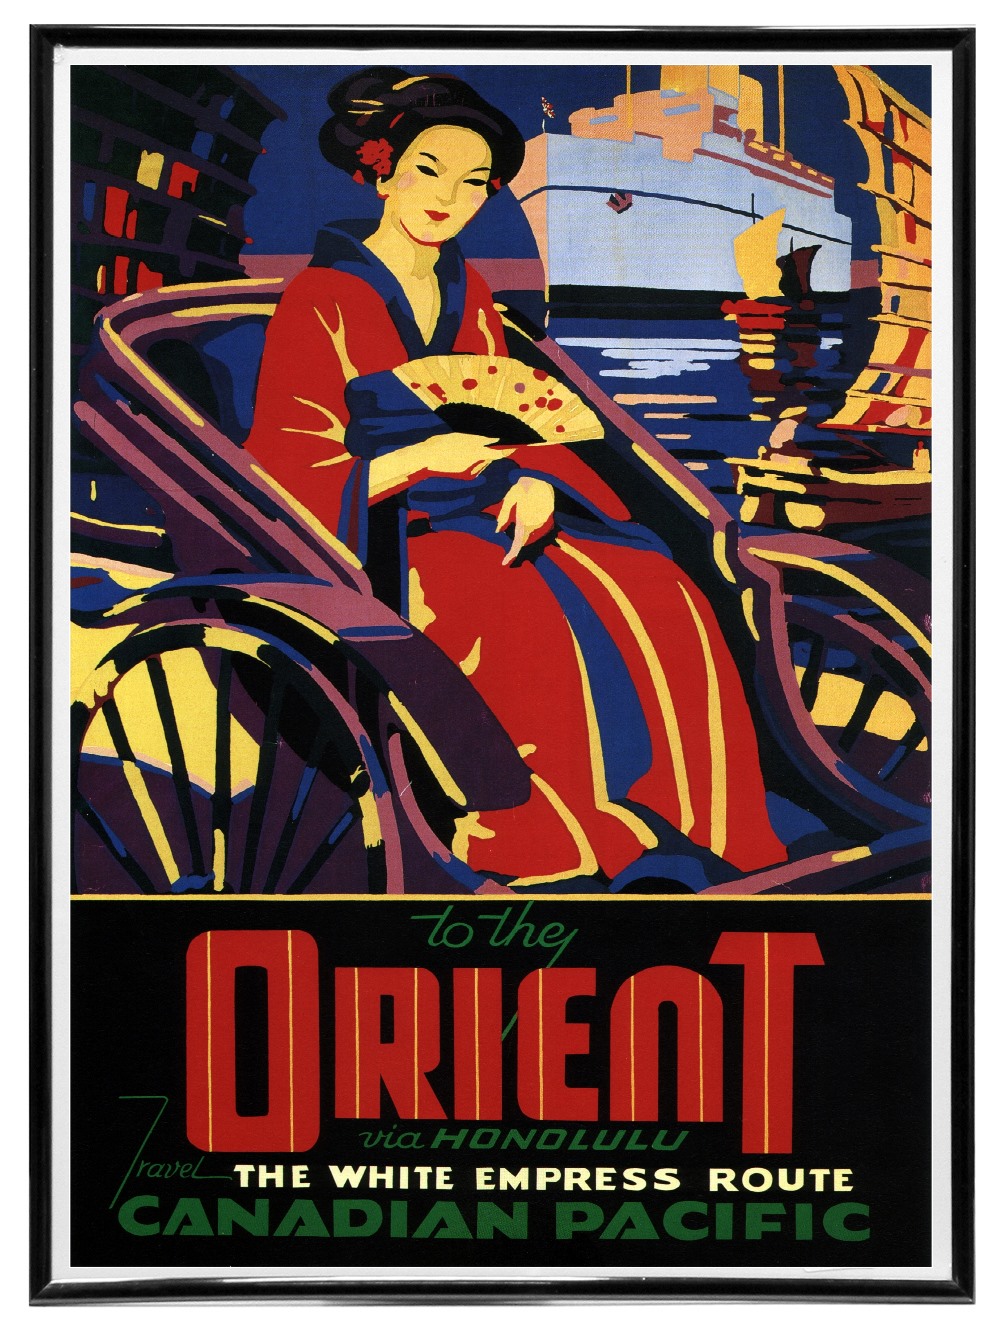 Vintage Travel Posters - Hi Res Collection Vol 3 of 4